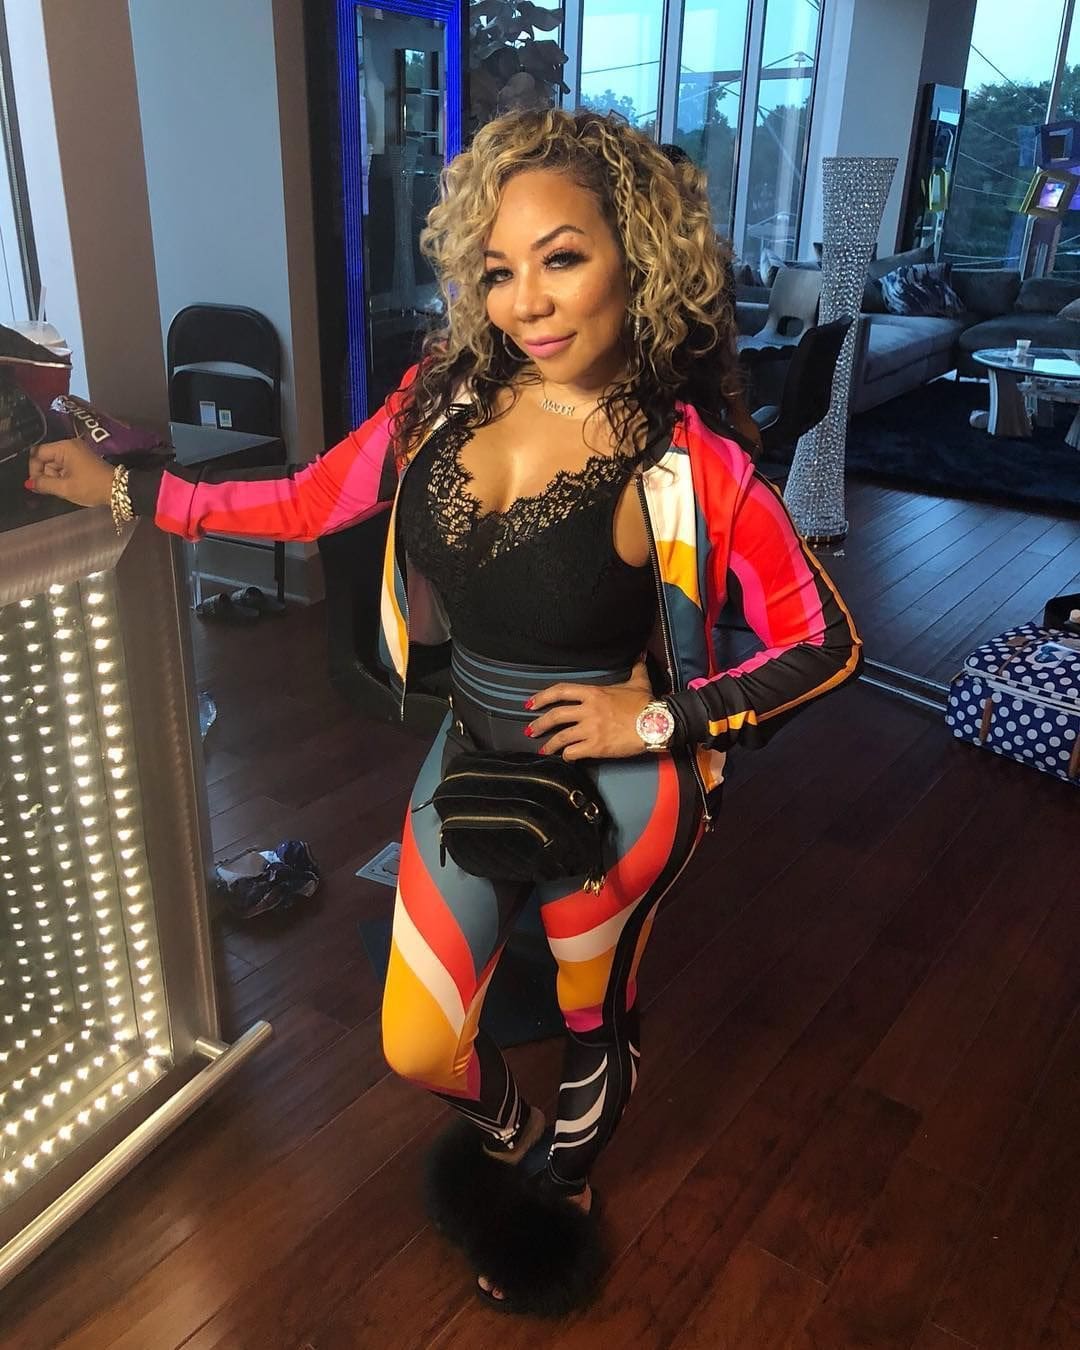 tiny-harris-fans-go-crazy-with-excitement-to-see-her-new-look